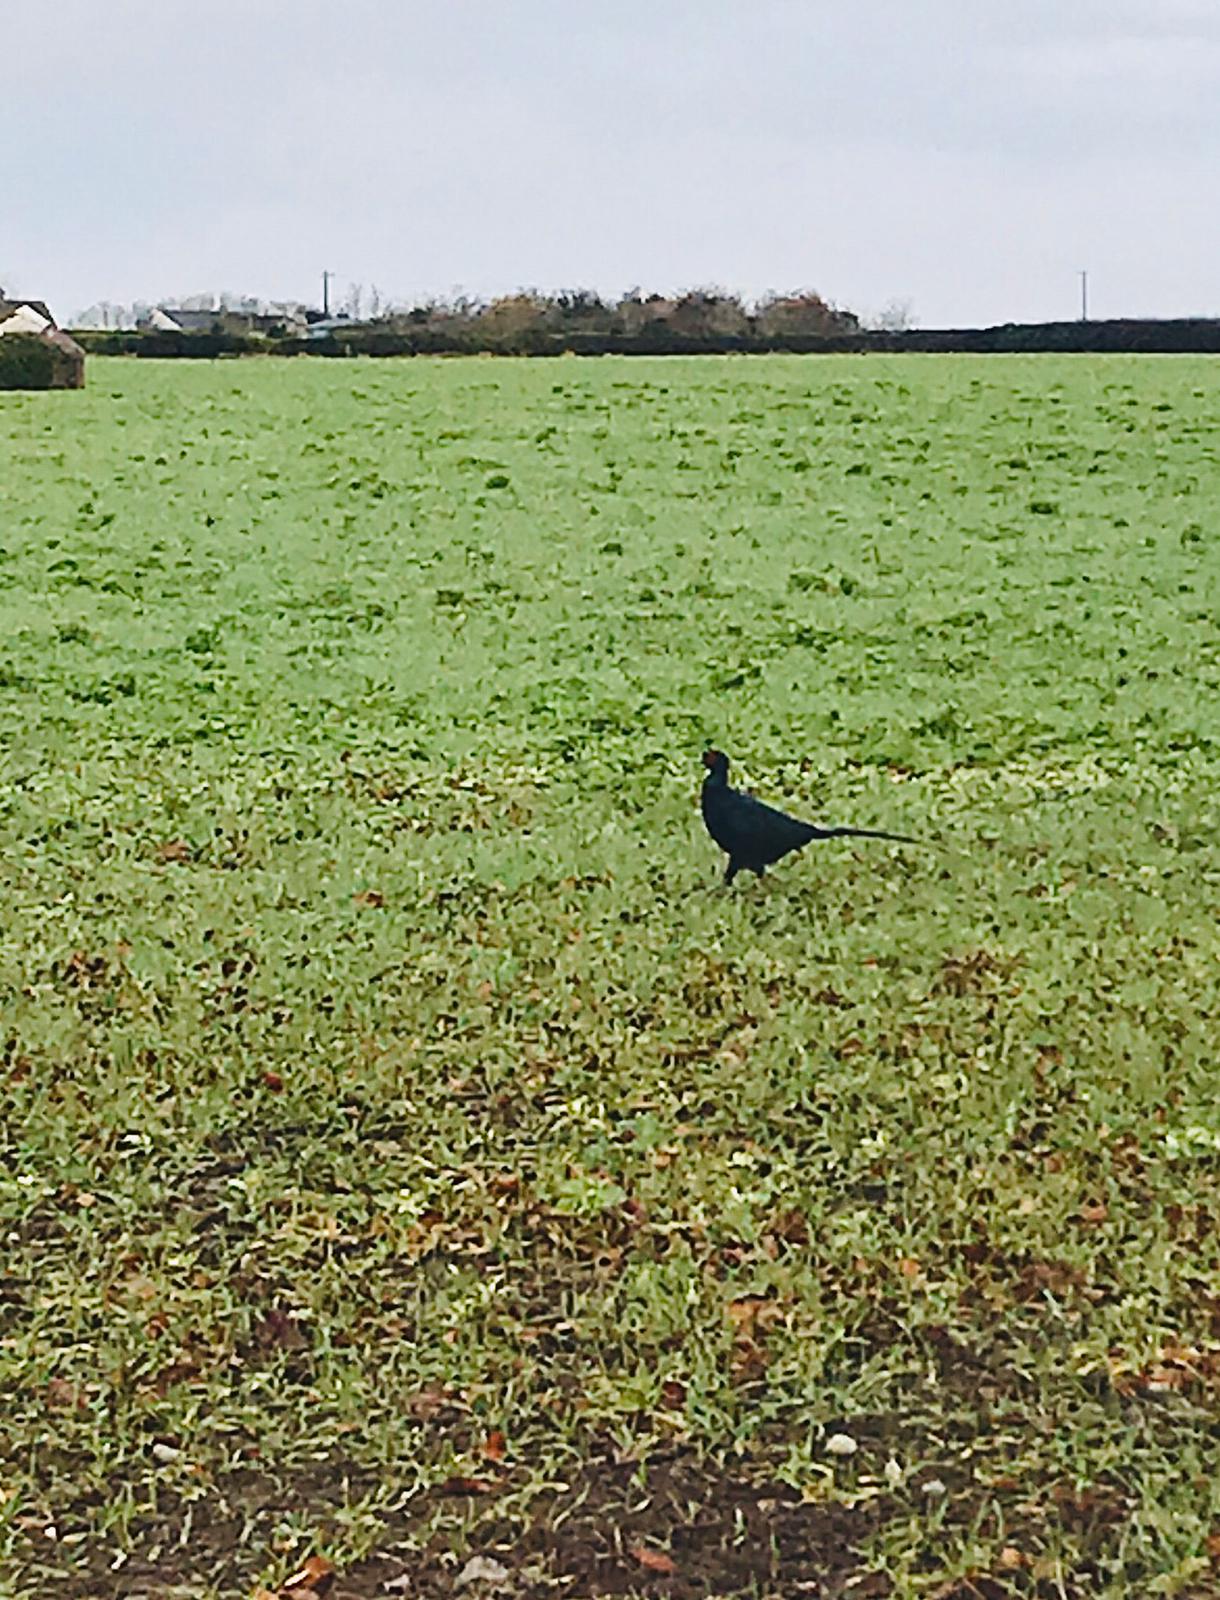 One of my Black pheasants taking a stroll into the danger zonejpg